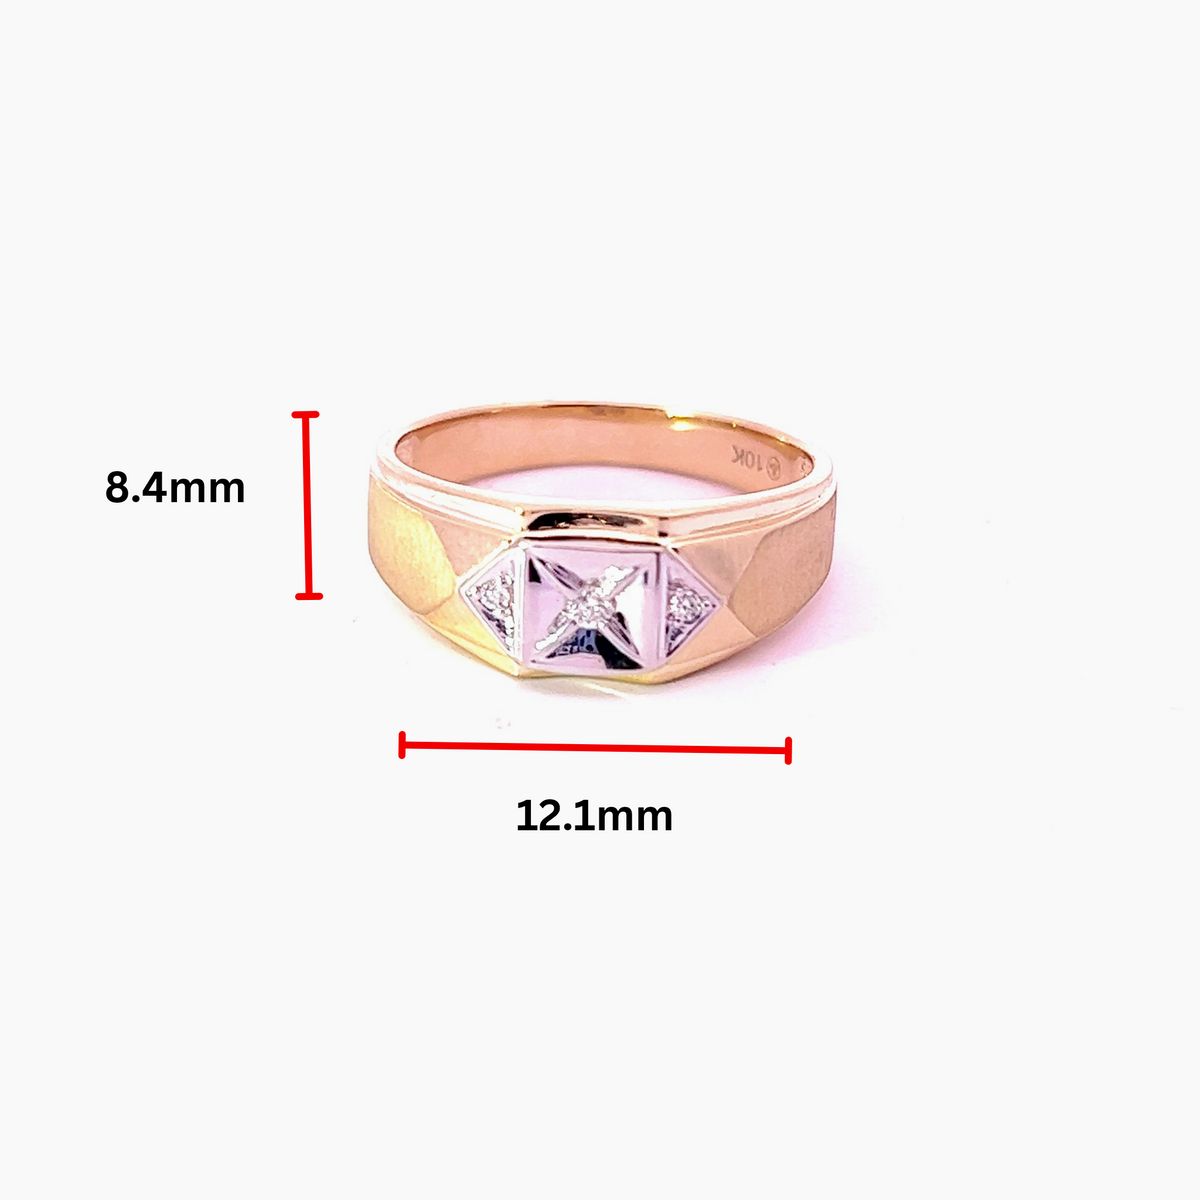 10K Yellow Gold 0.05cttw Diamond Gents Ring, size 10